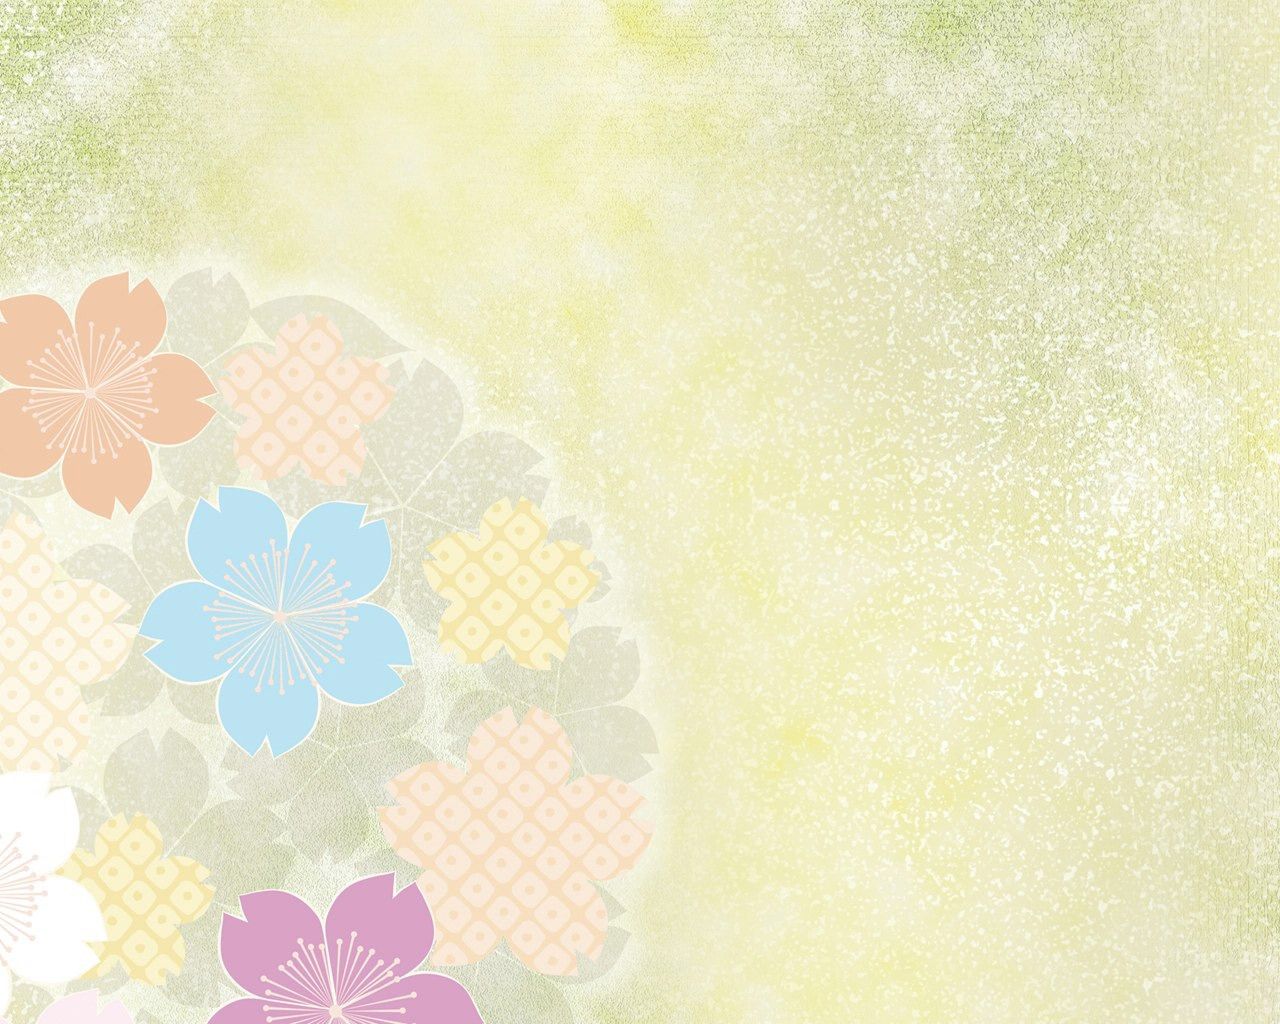 free background clipart pictures - photo #5